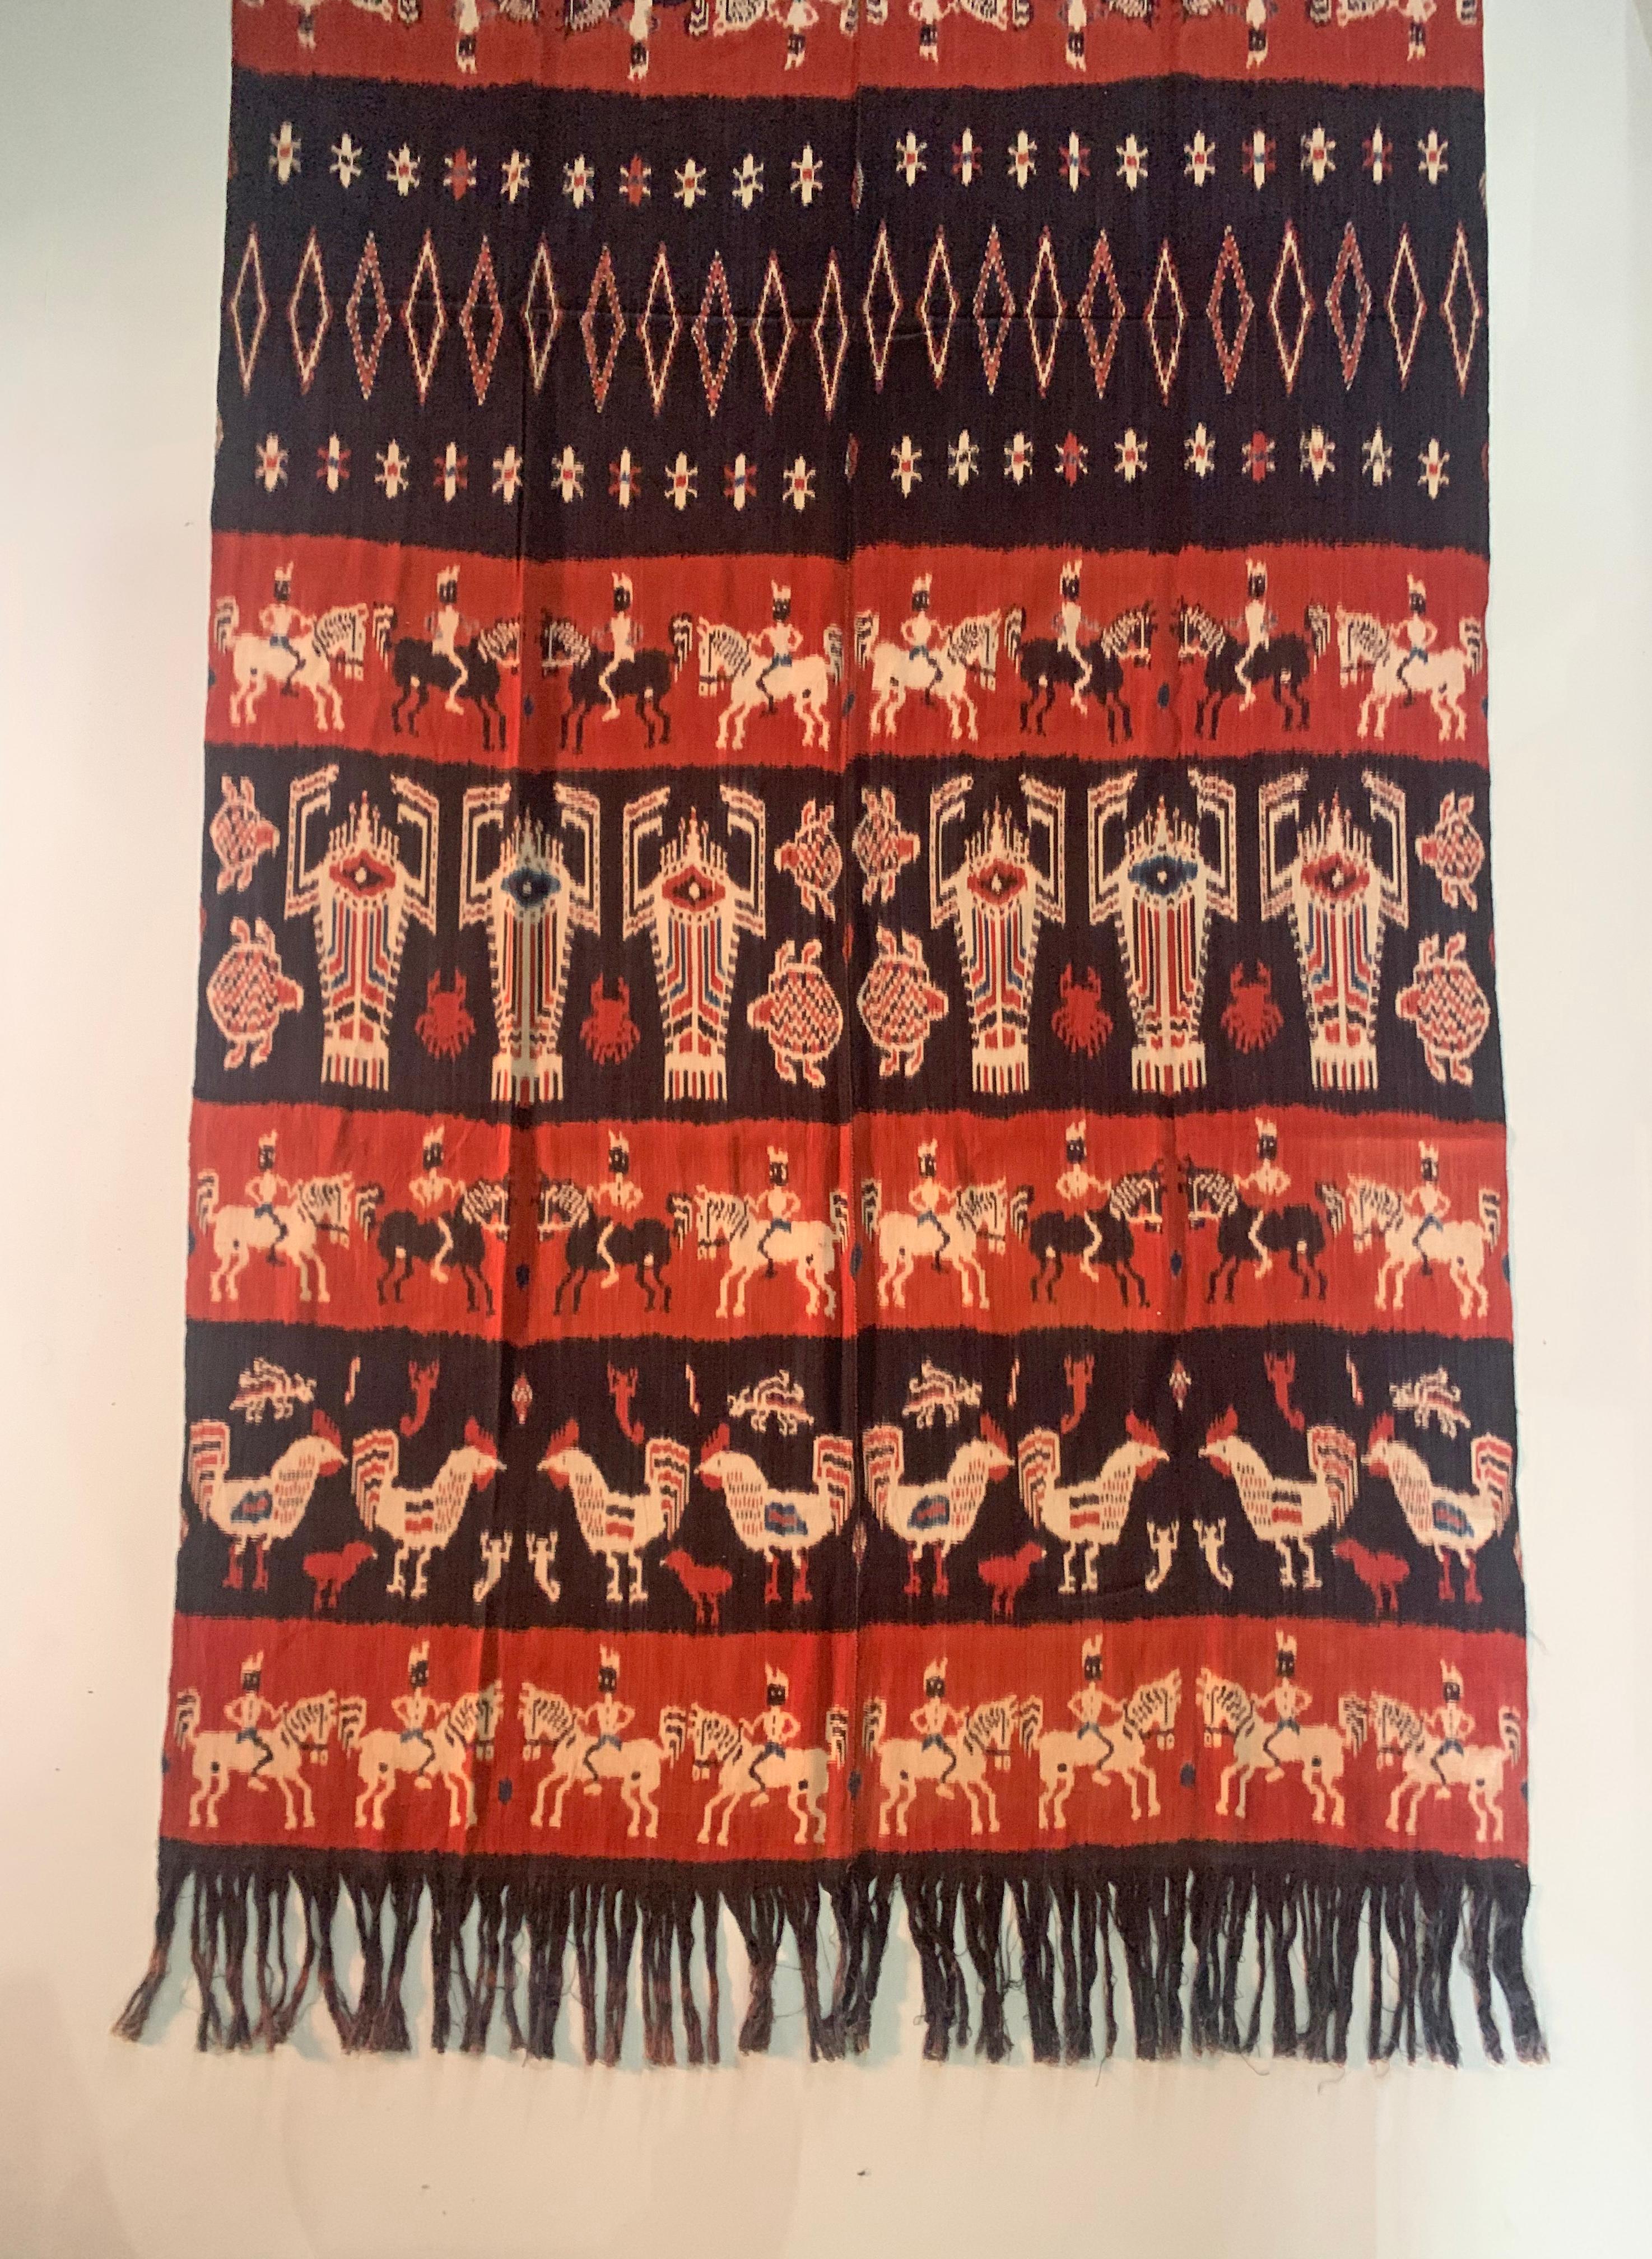 This Ikat textile originates from the Island of Sumba, Indonesia. It is hand-woven using naturally dyed yarns via a method passed on through generations. It features a stunning array of distinct tribal patterns as well as men on horse, chicken, ,